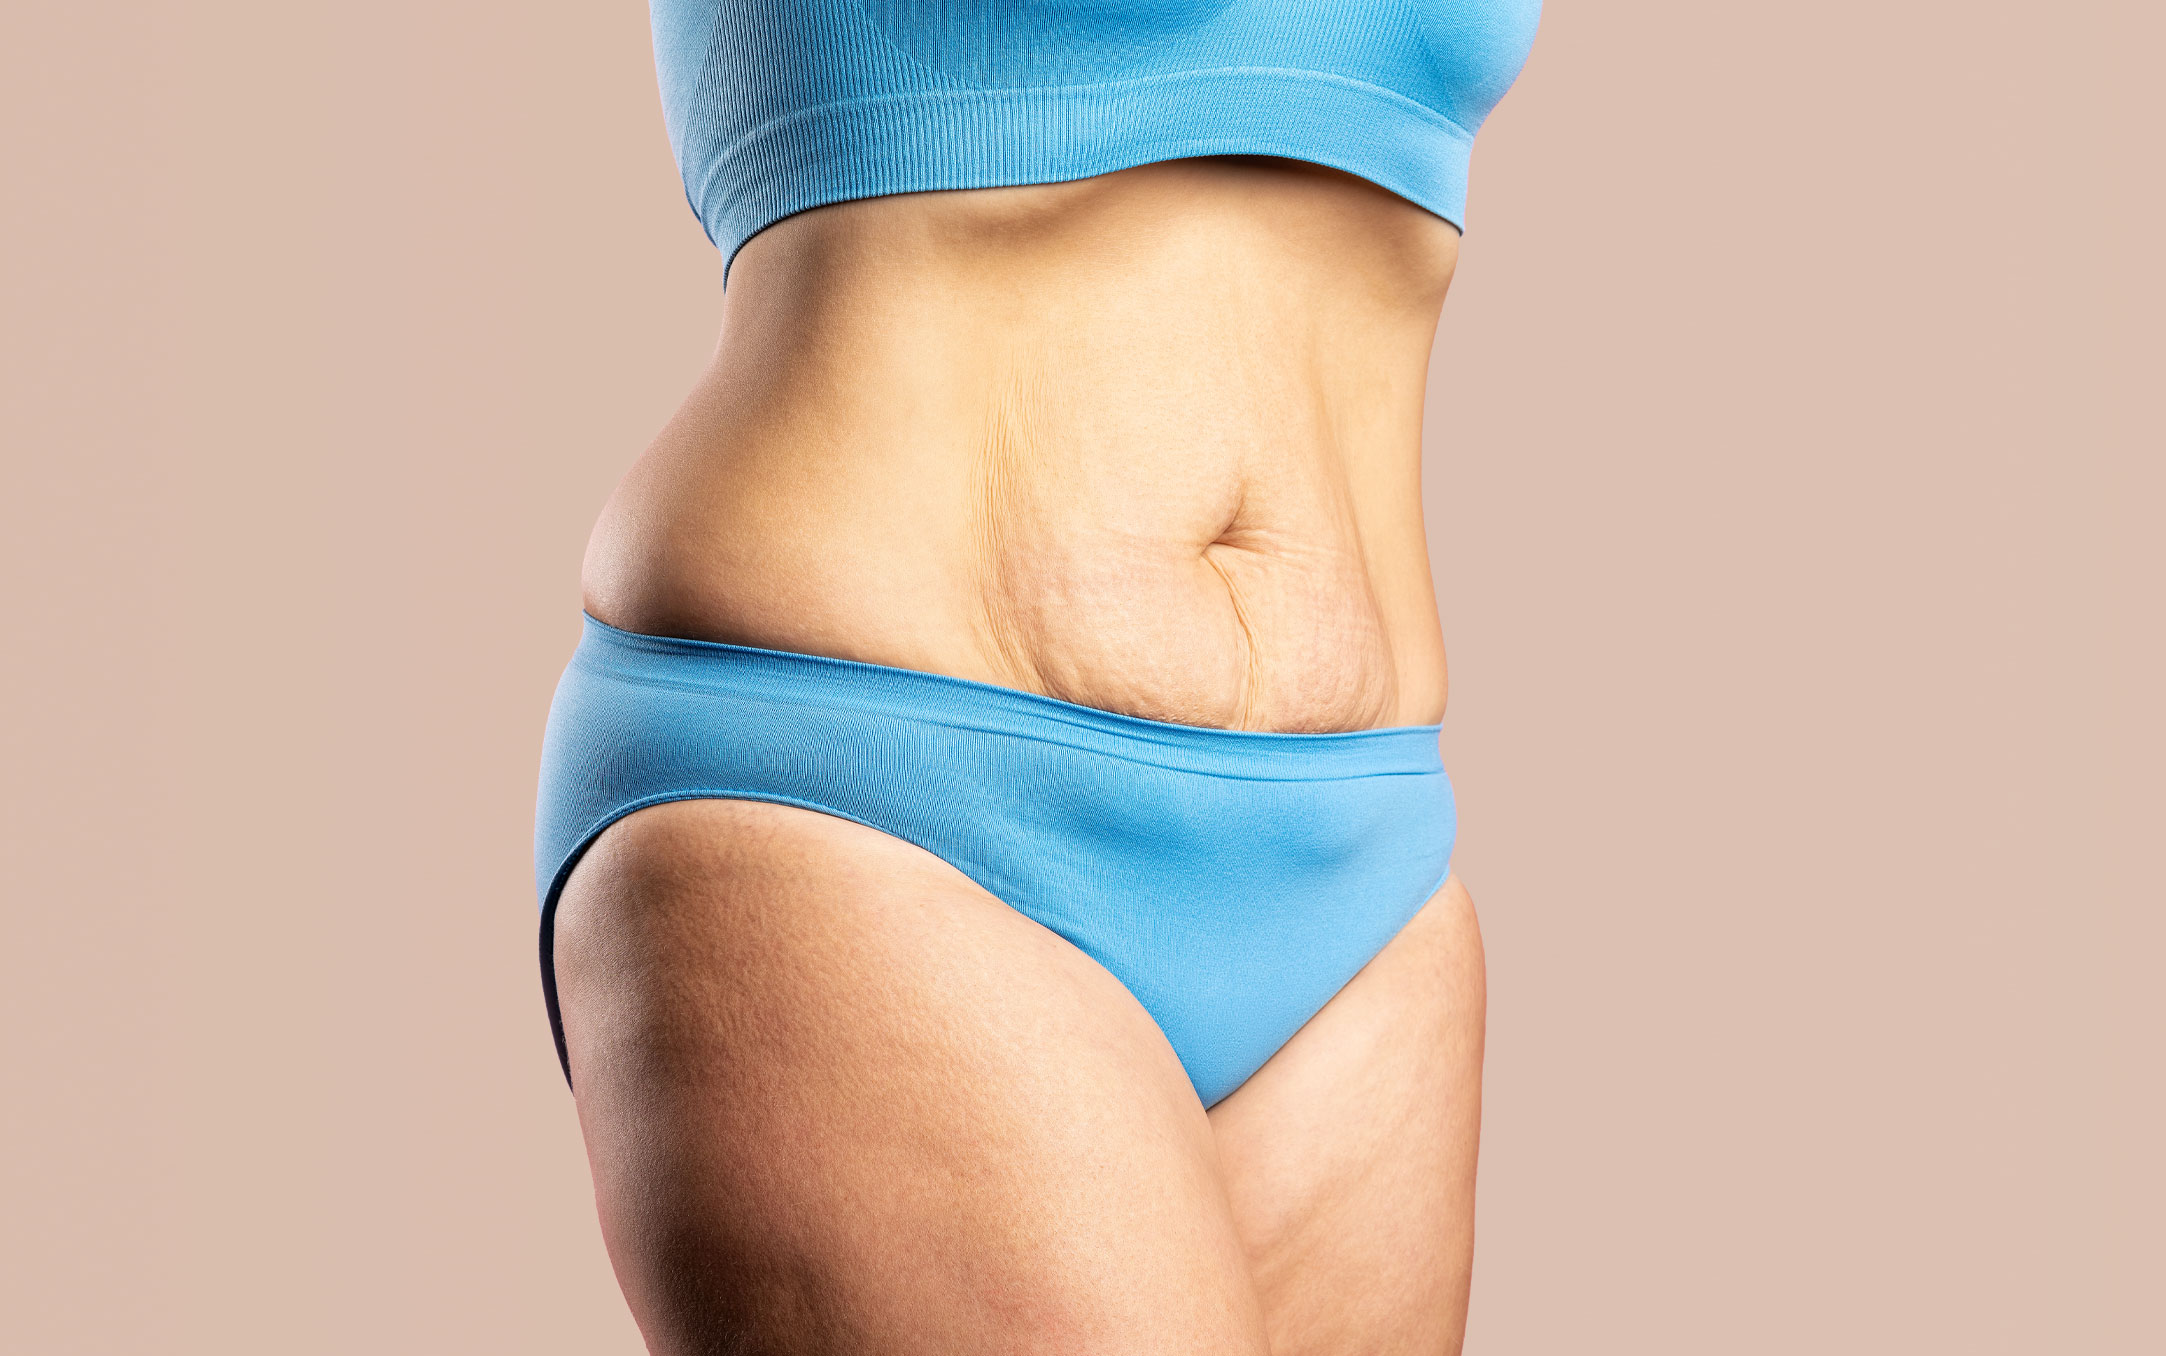 How to Tighten Loose and Sagging Skin After Weight Loss Surgery